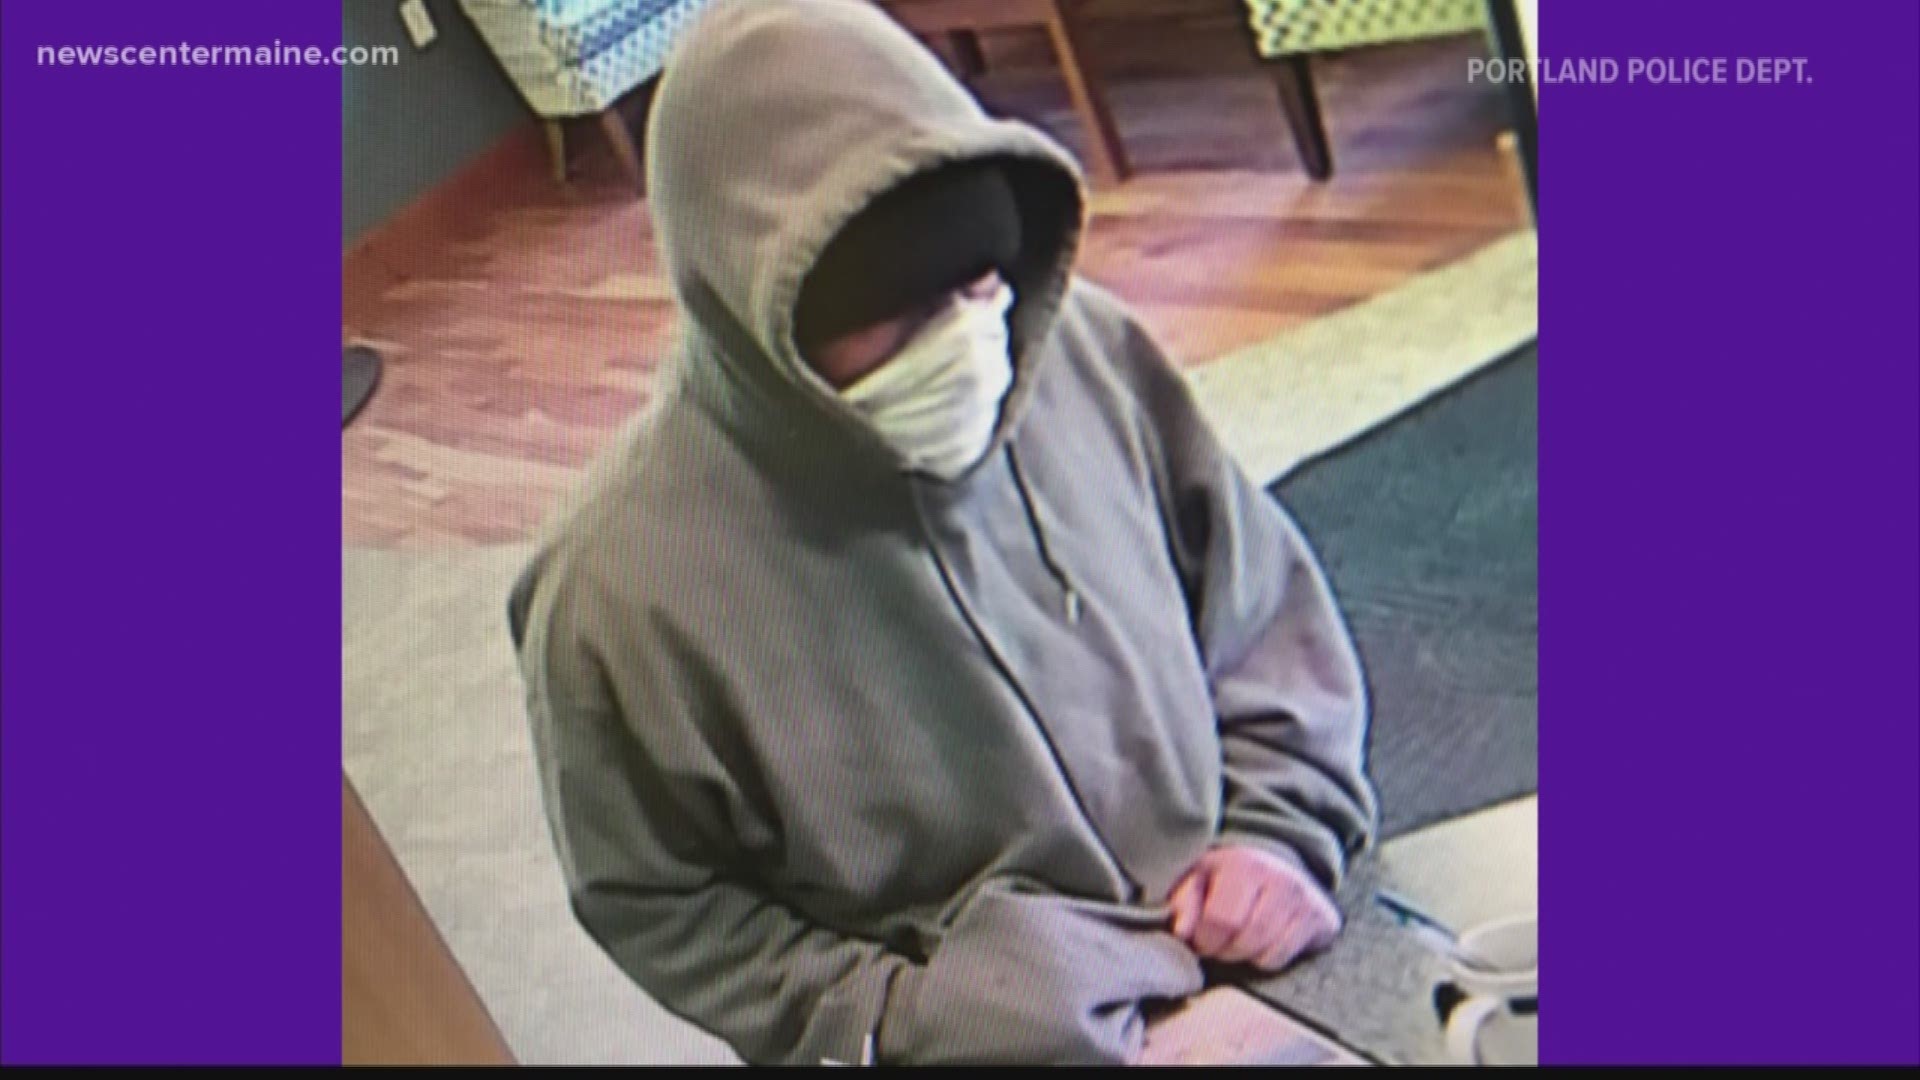 The Portland Police Department is looking for the suspect of an armed bank robbery at Norway Savings Bank on Forest Avenue Monday.